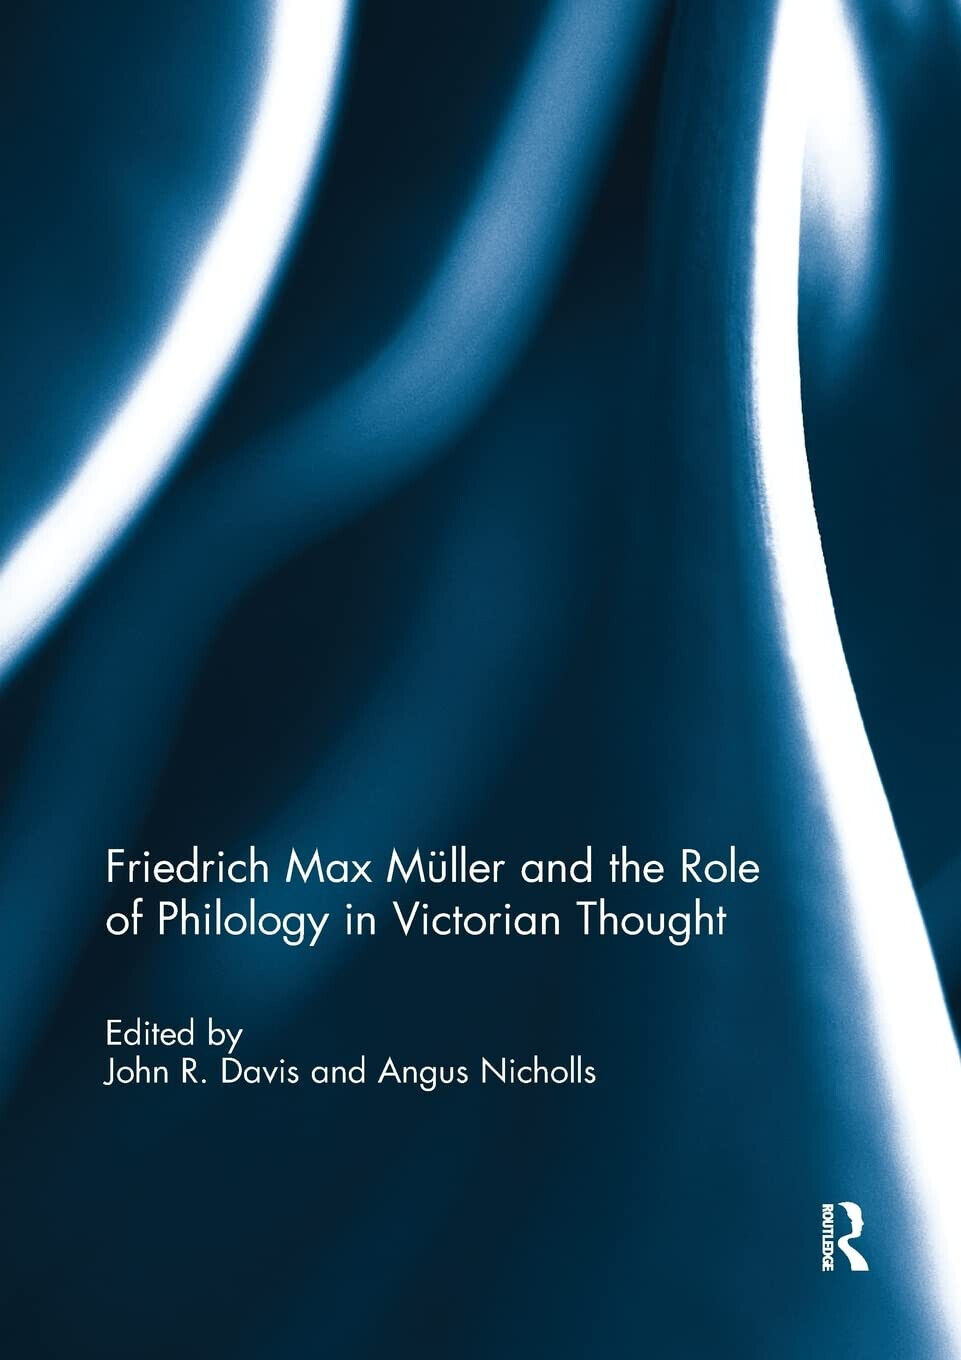 Friedrich Max Muller and the Role of Philology in Victorian Thought - 2019